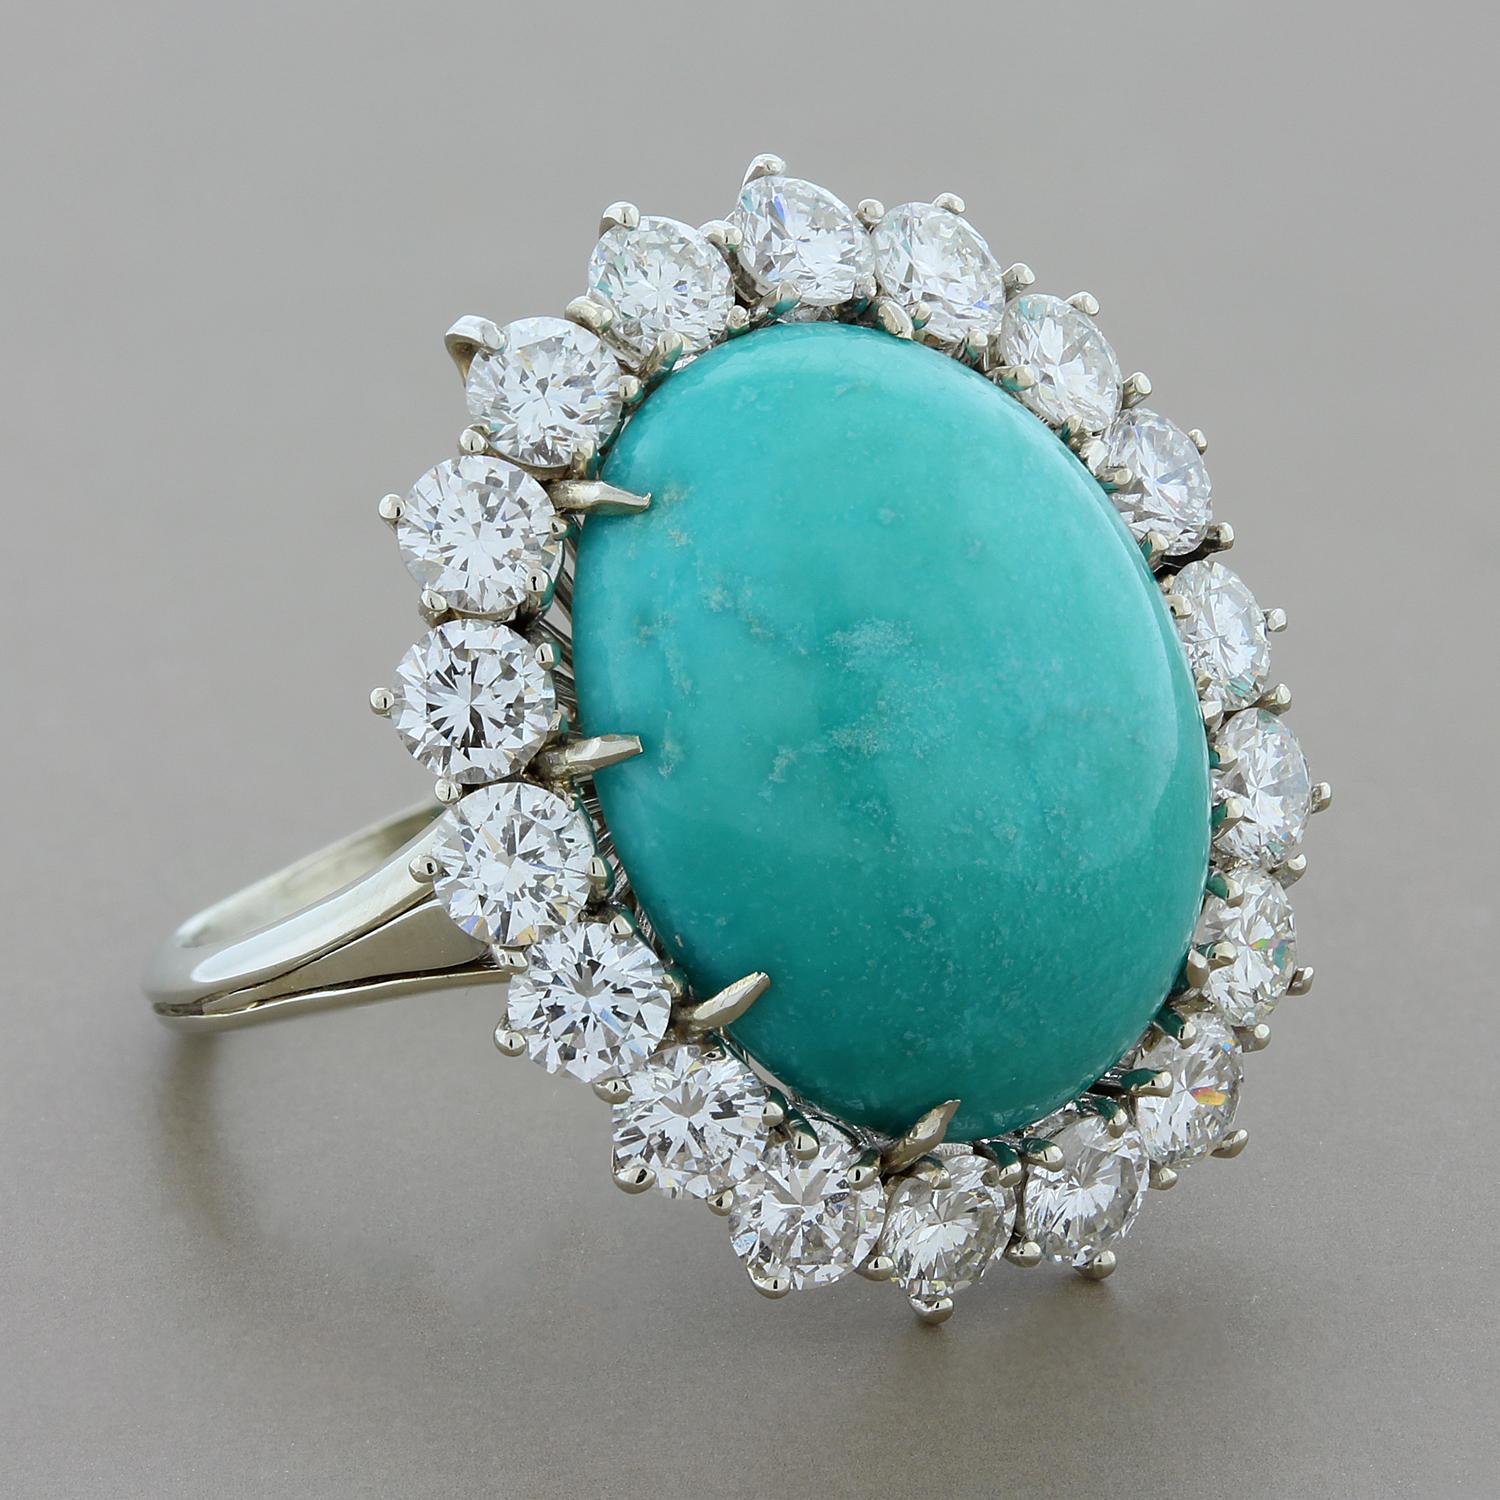 An exceptional ring featuring a beautifully colored slightly greenish blue turquoise of gem quality. Haloing the prized gemstone are 3.03 carats of round cut white VS diamonds set in 14K white gold.

Ring Size 6.75 (Sizable)
